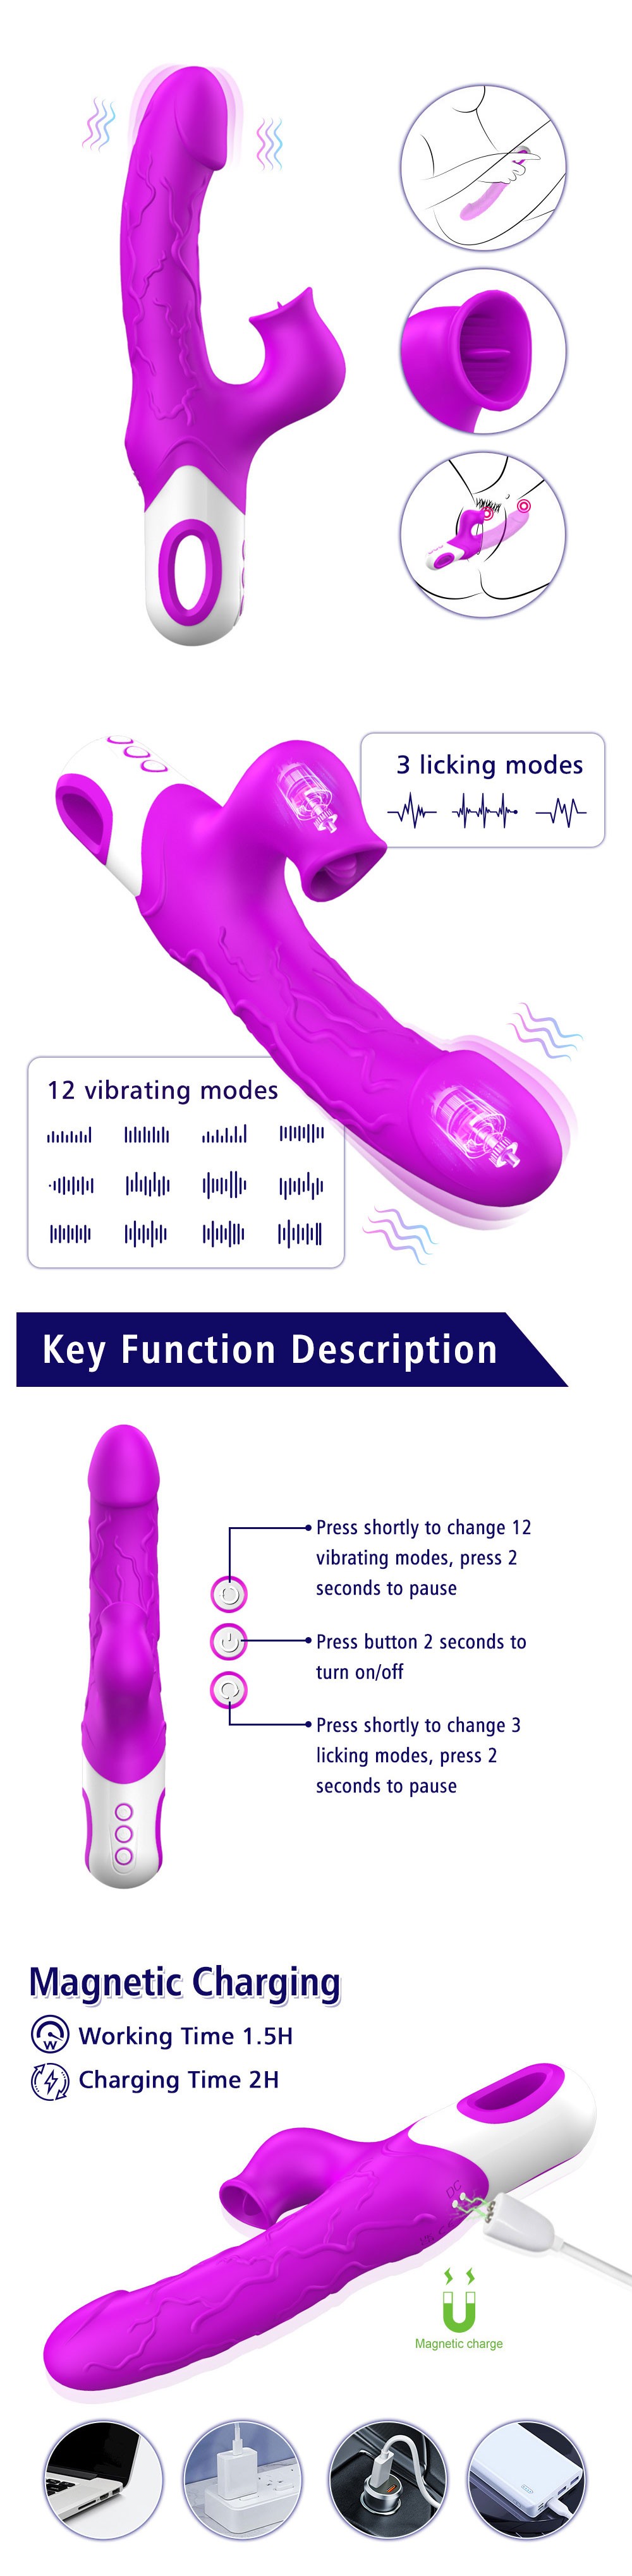 Powerful Licking and Vibrating Wand qq